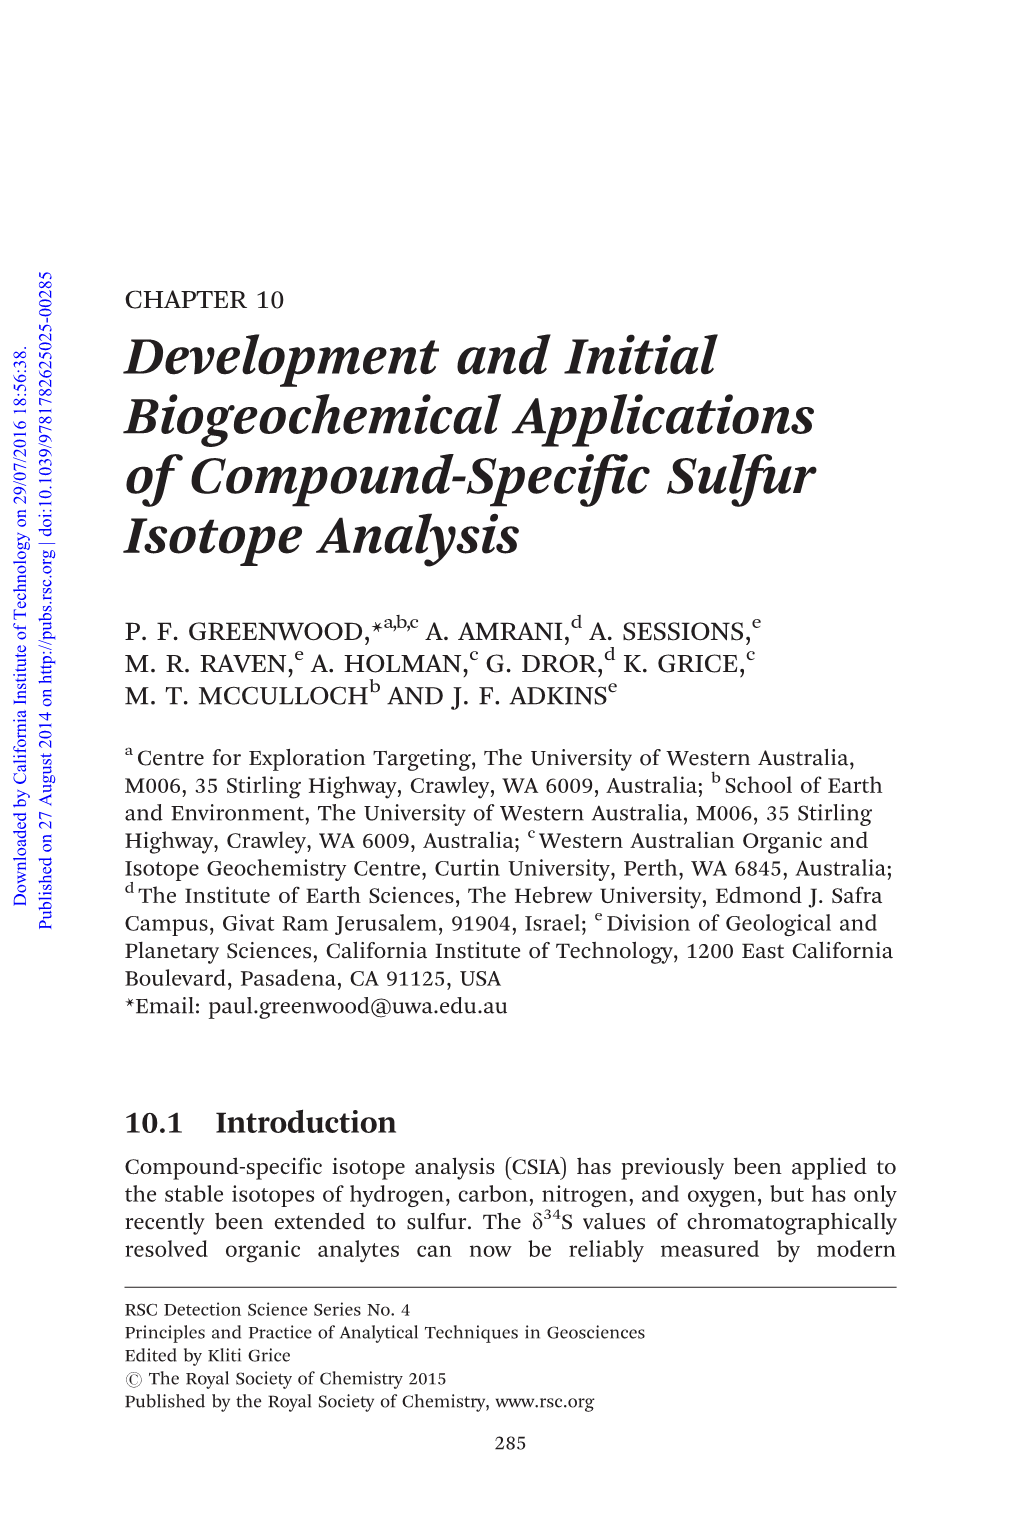 Development and Initial Biogeochemical Applications of Compound-Specific Sulfur Isotope Analysis